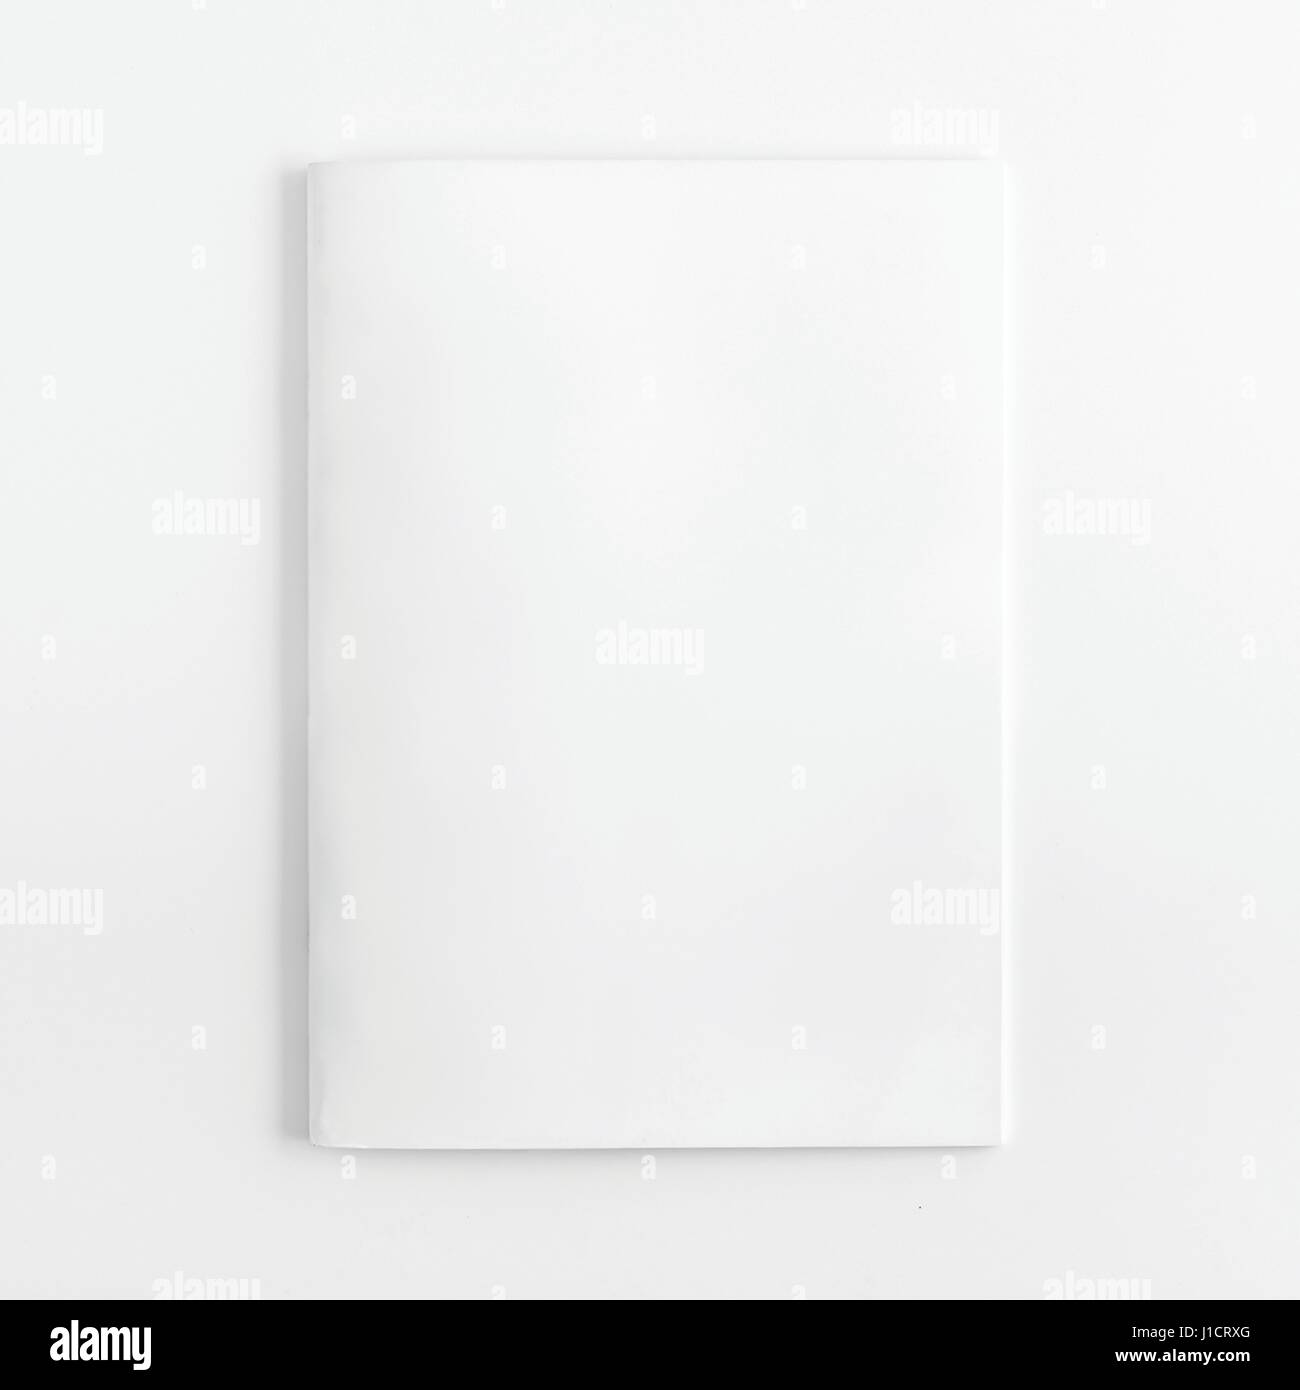 Magazine, A5/A4 Brochure Mock-up on Isolated White Background Stock Photo